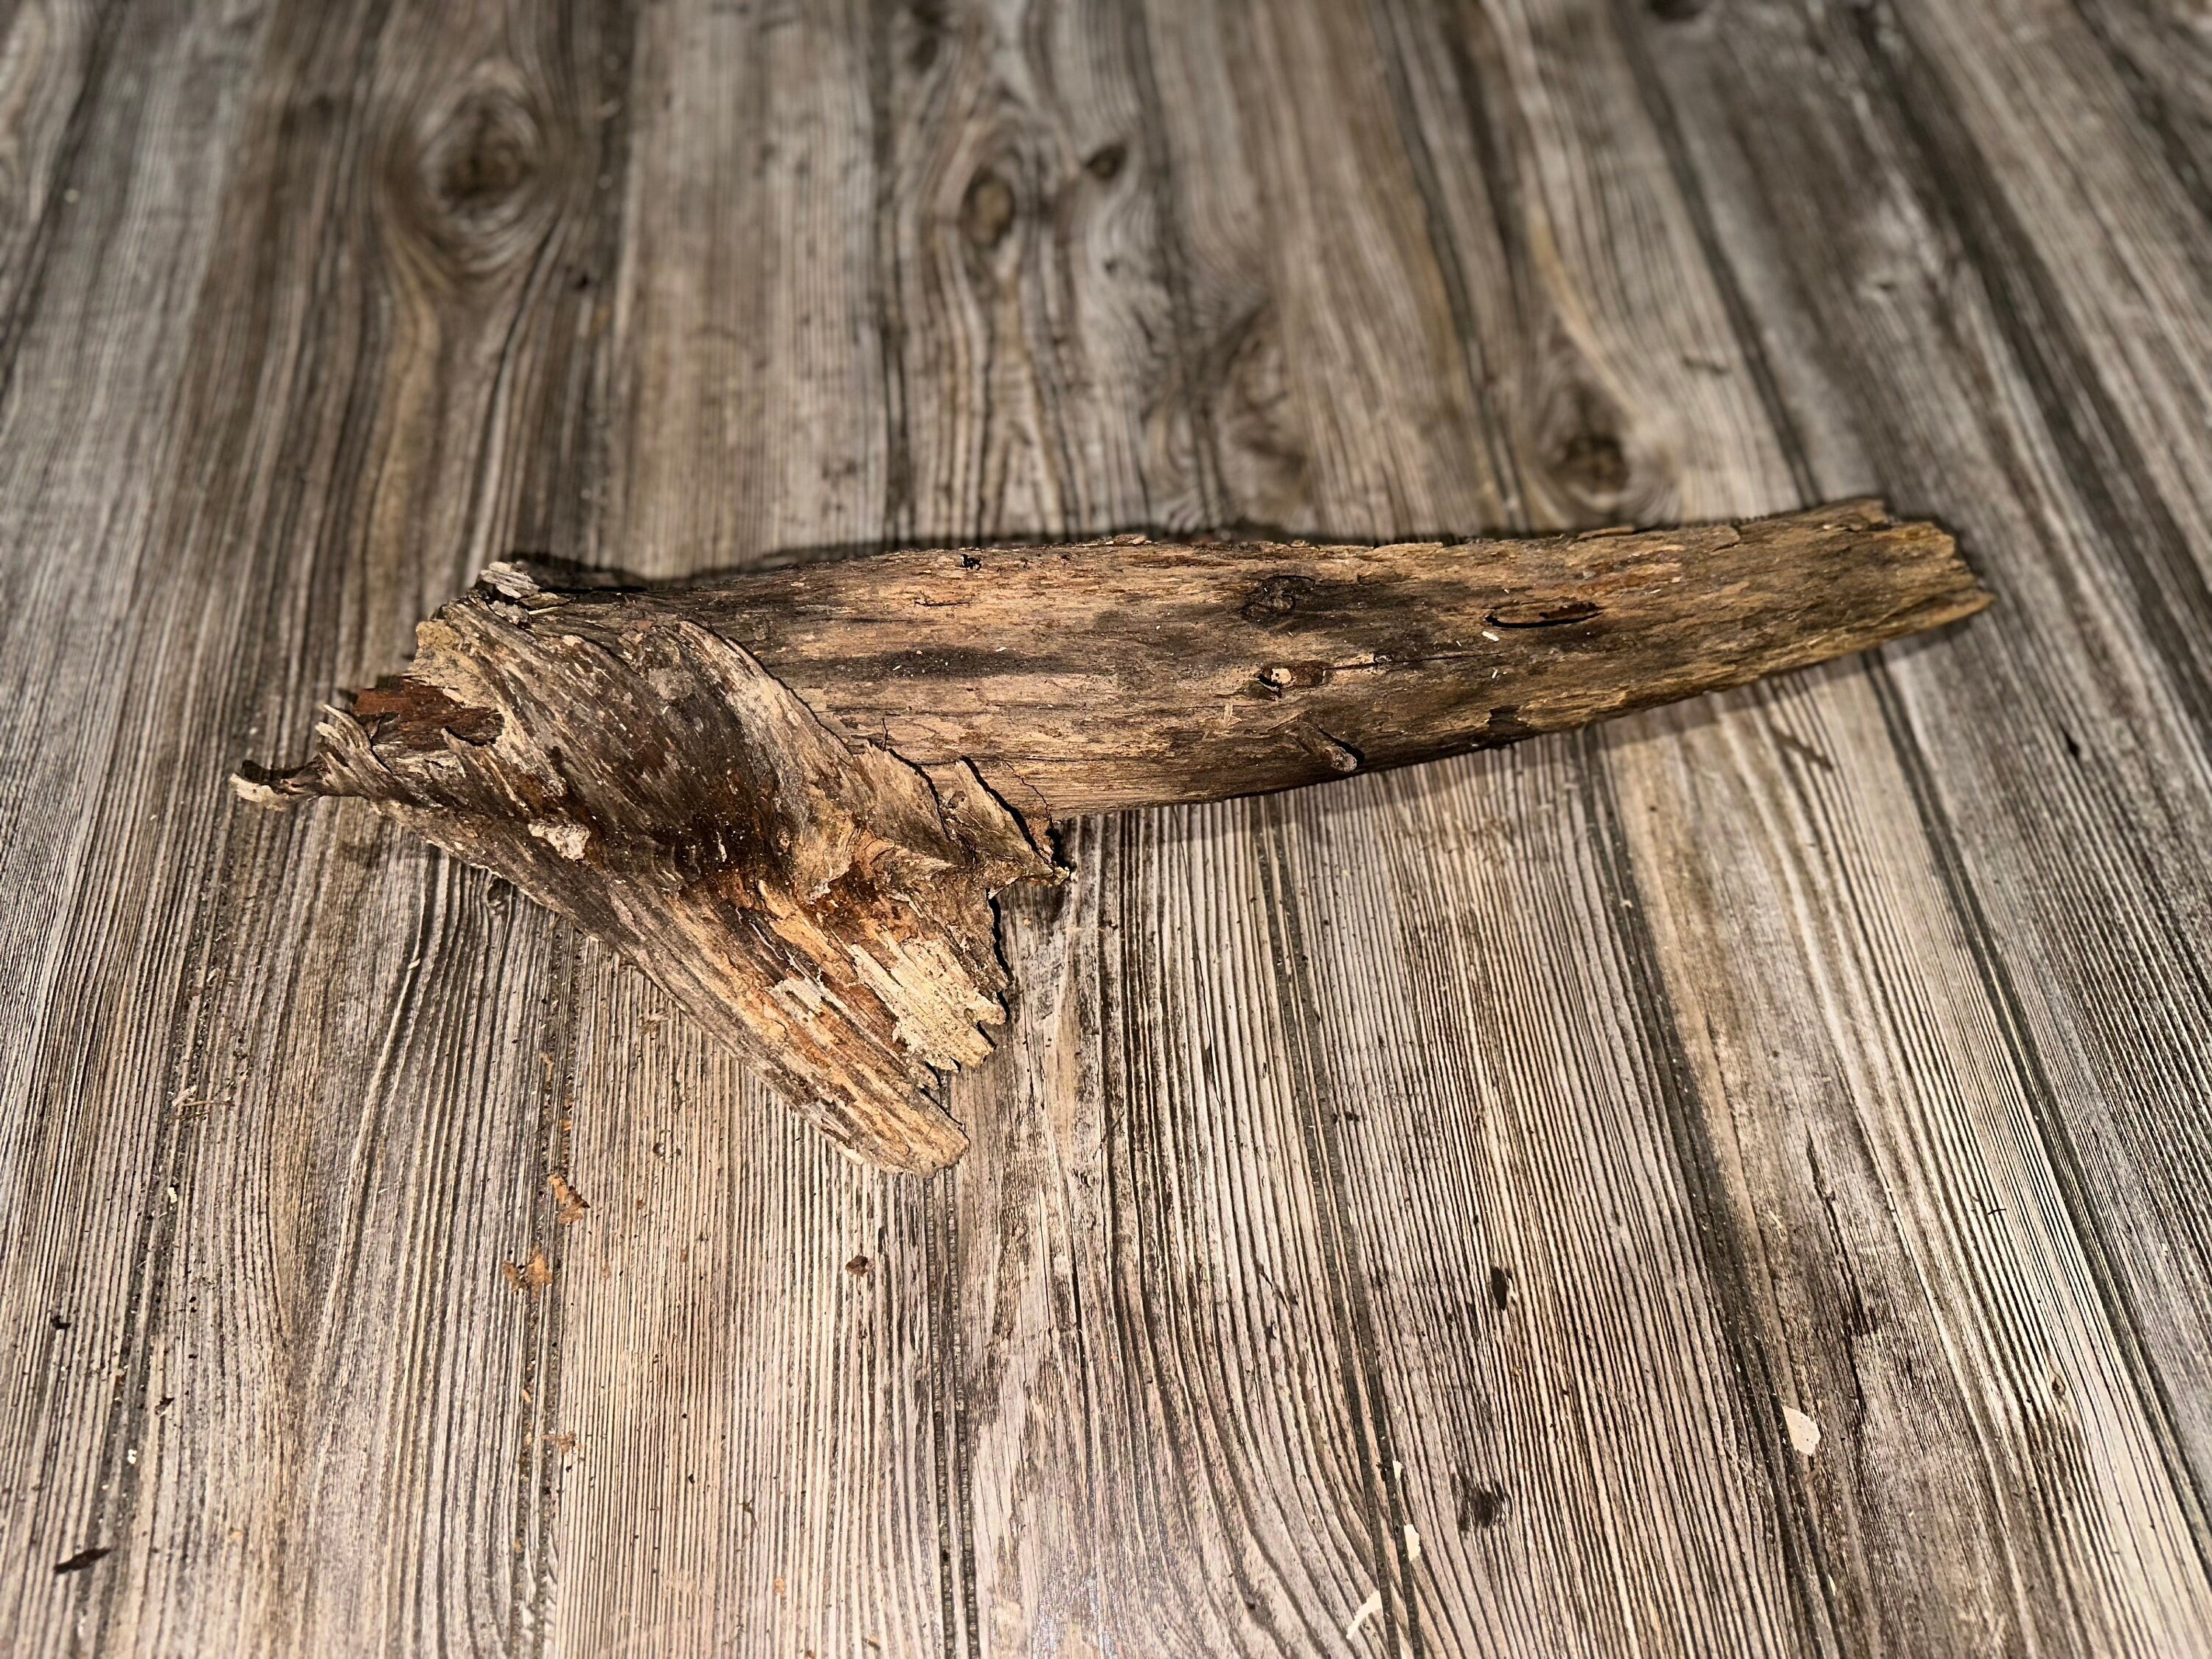 Tree Limb, Branch End, Driftwood, Approximately 20 Inches Long by 6 Inches Wide and 4 Inches Tall